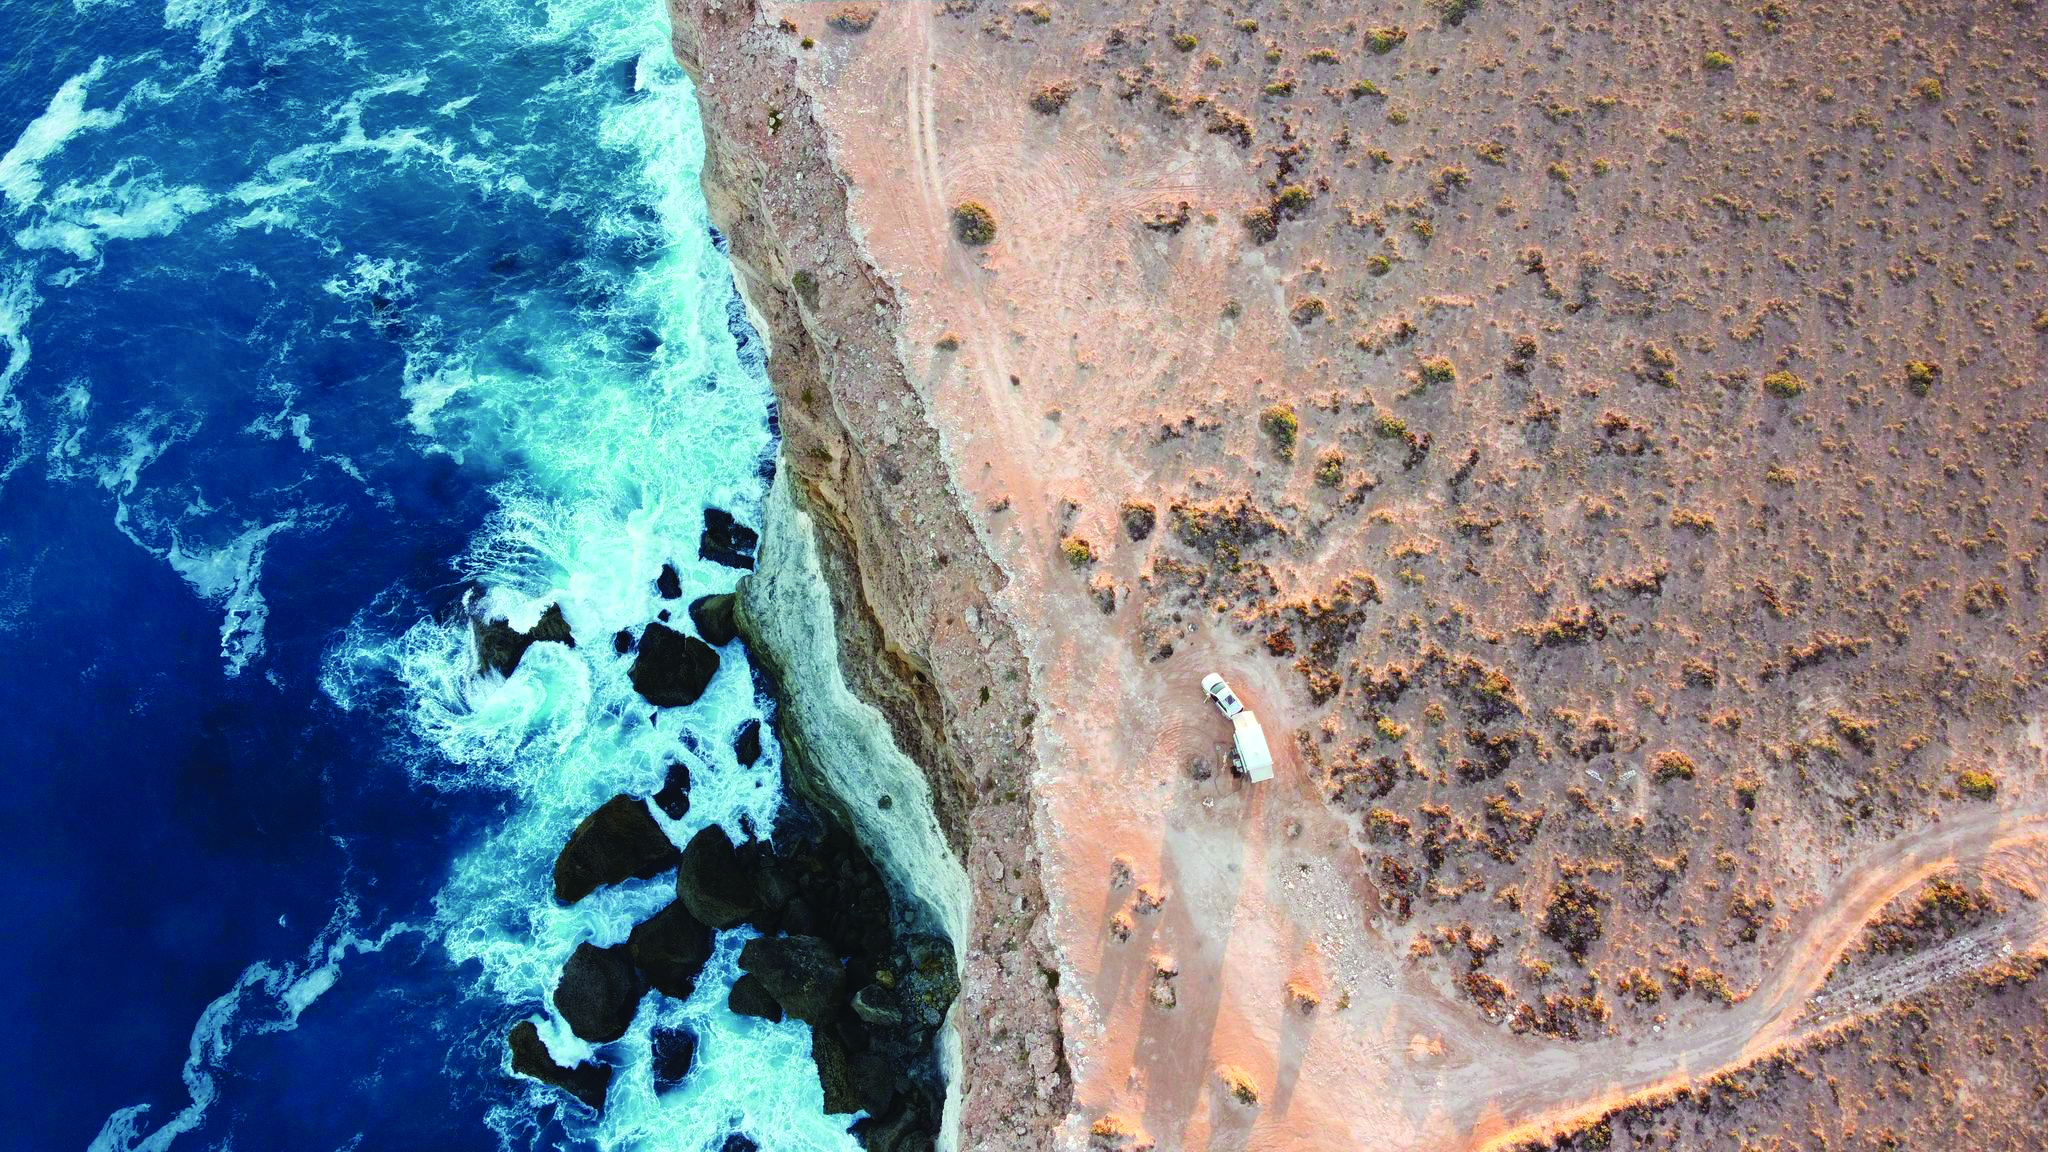 Bunda Cliffs SA- Tourism and travel have reached new heights with drones showing a new perspective that entices inter and intra-state travel. Credit: Ed Jones  